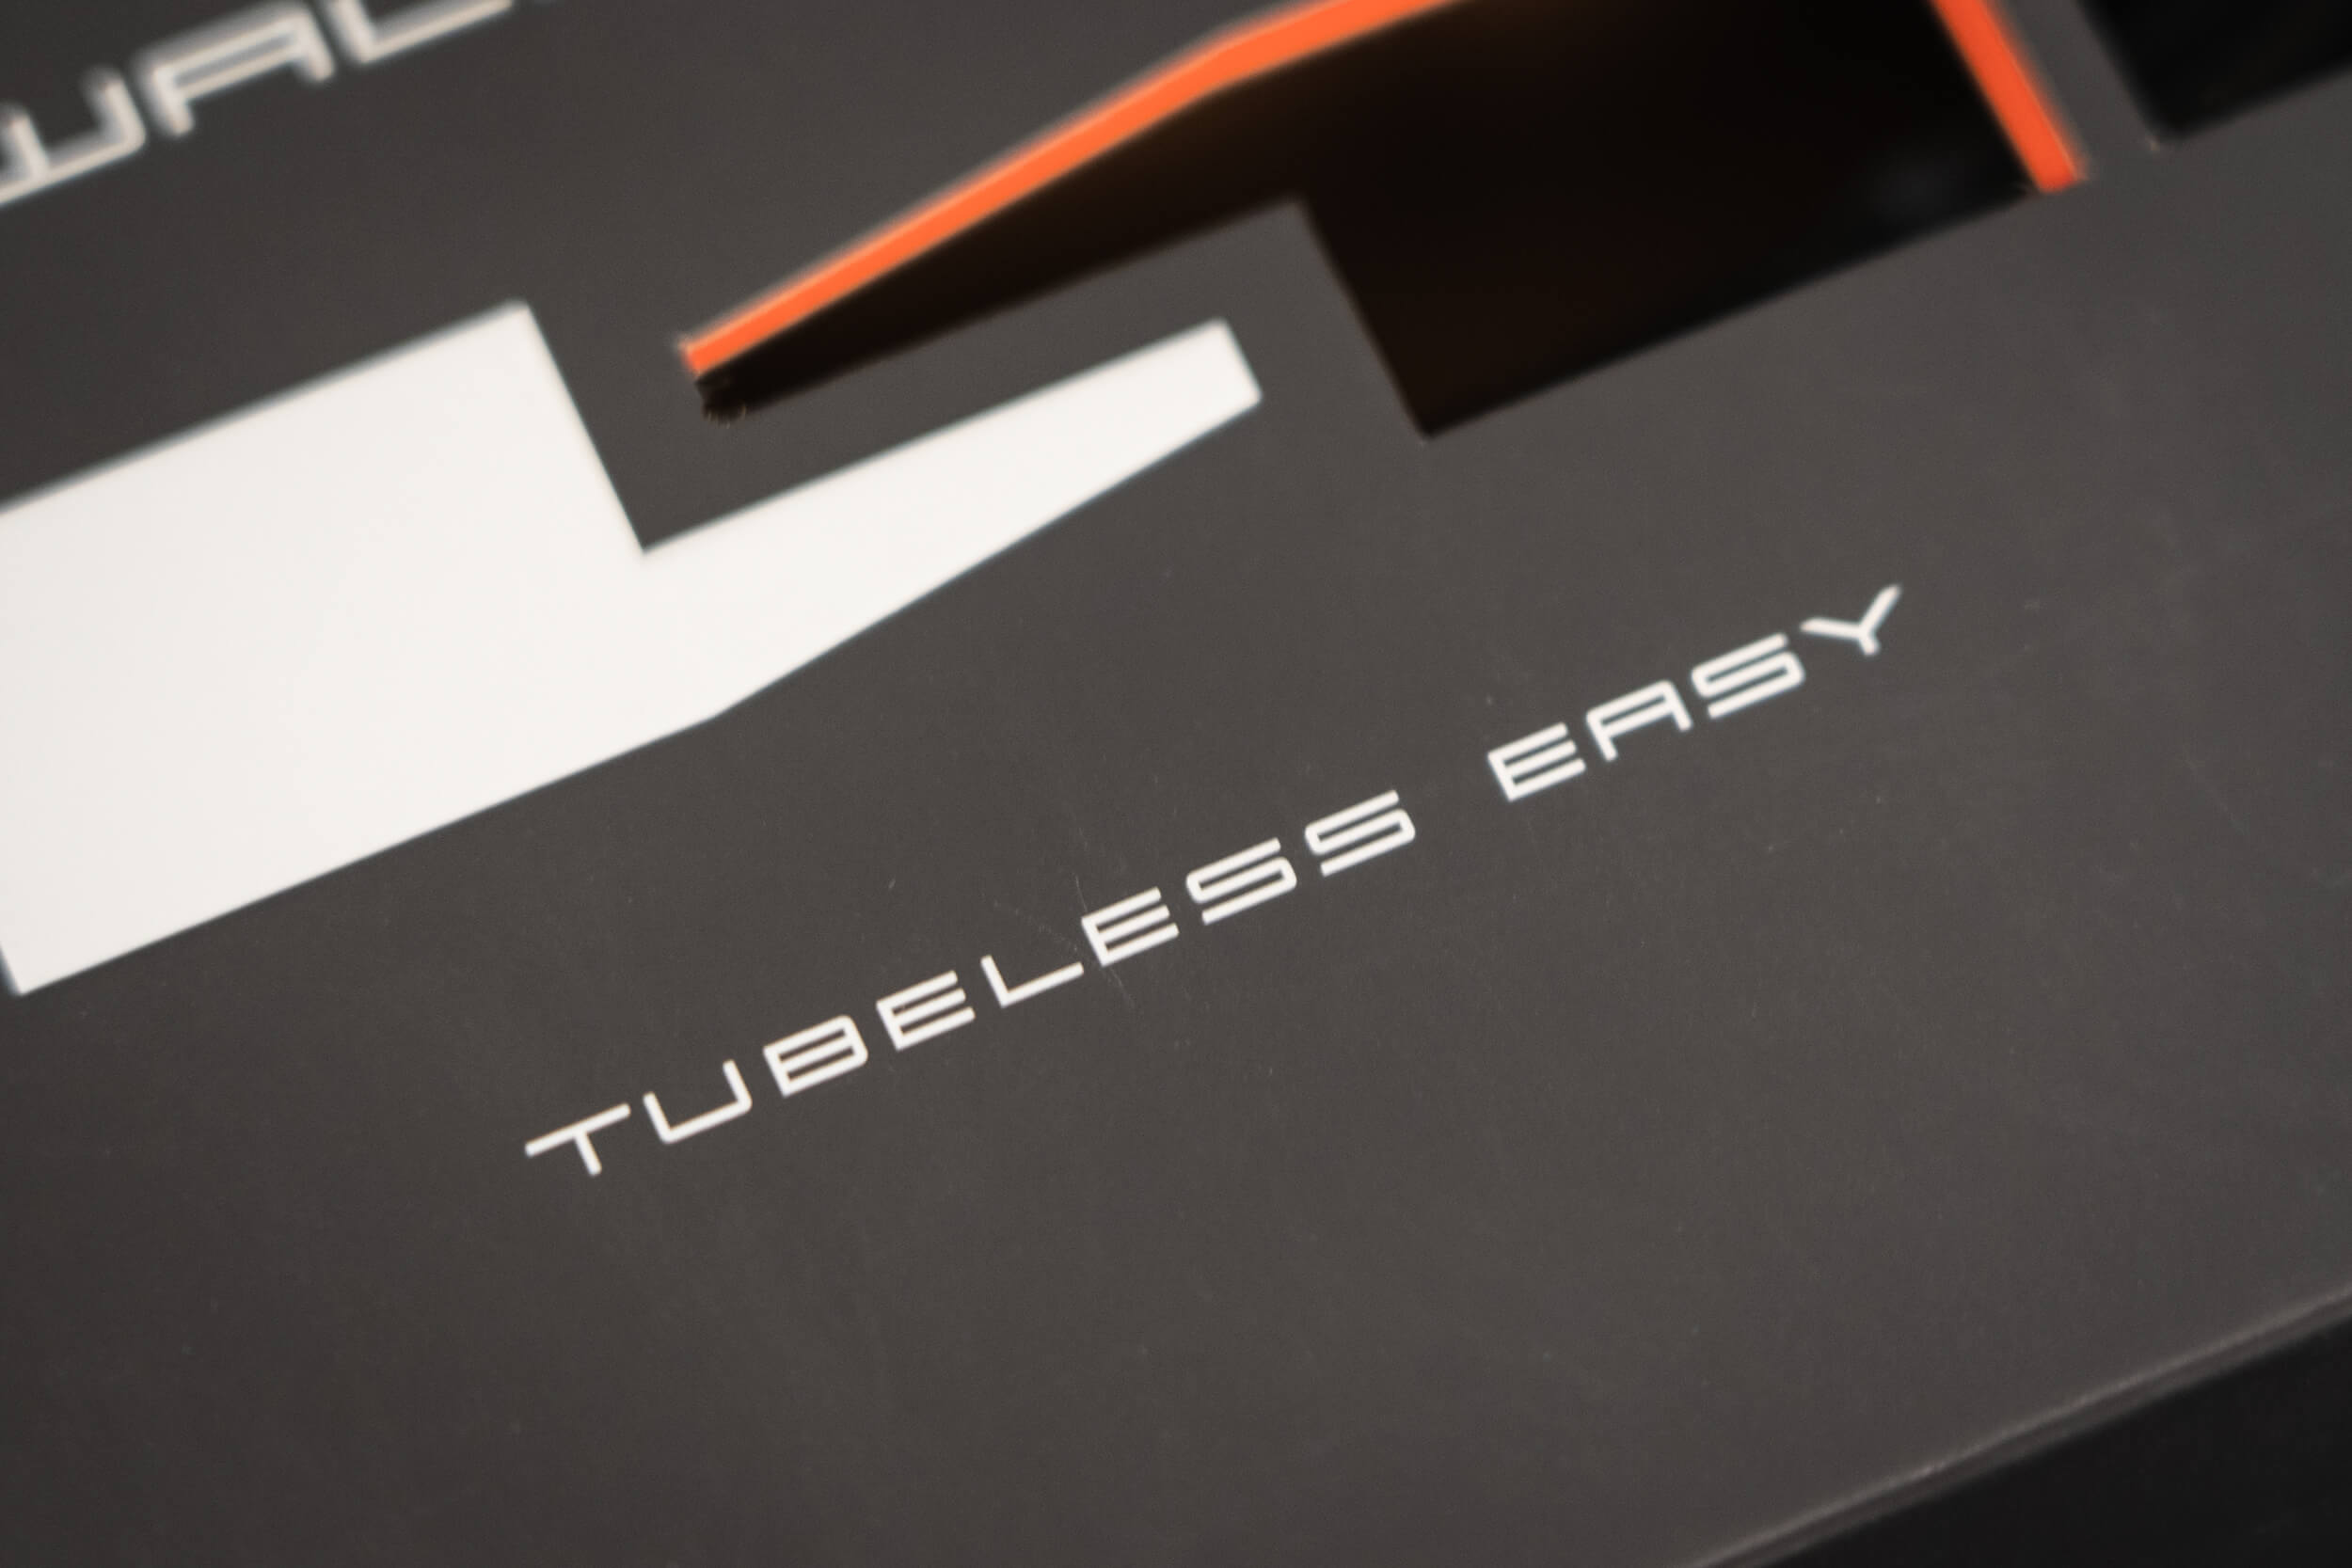 Is A Road Tubeless System Right For You?